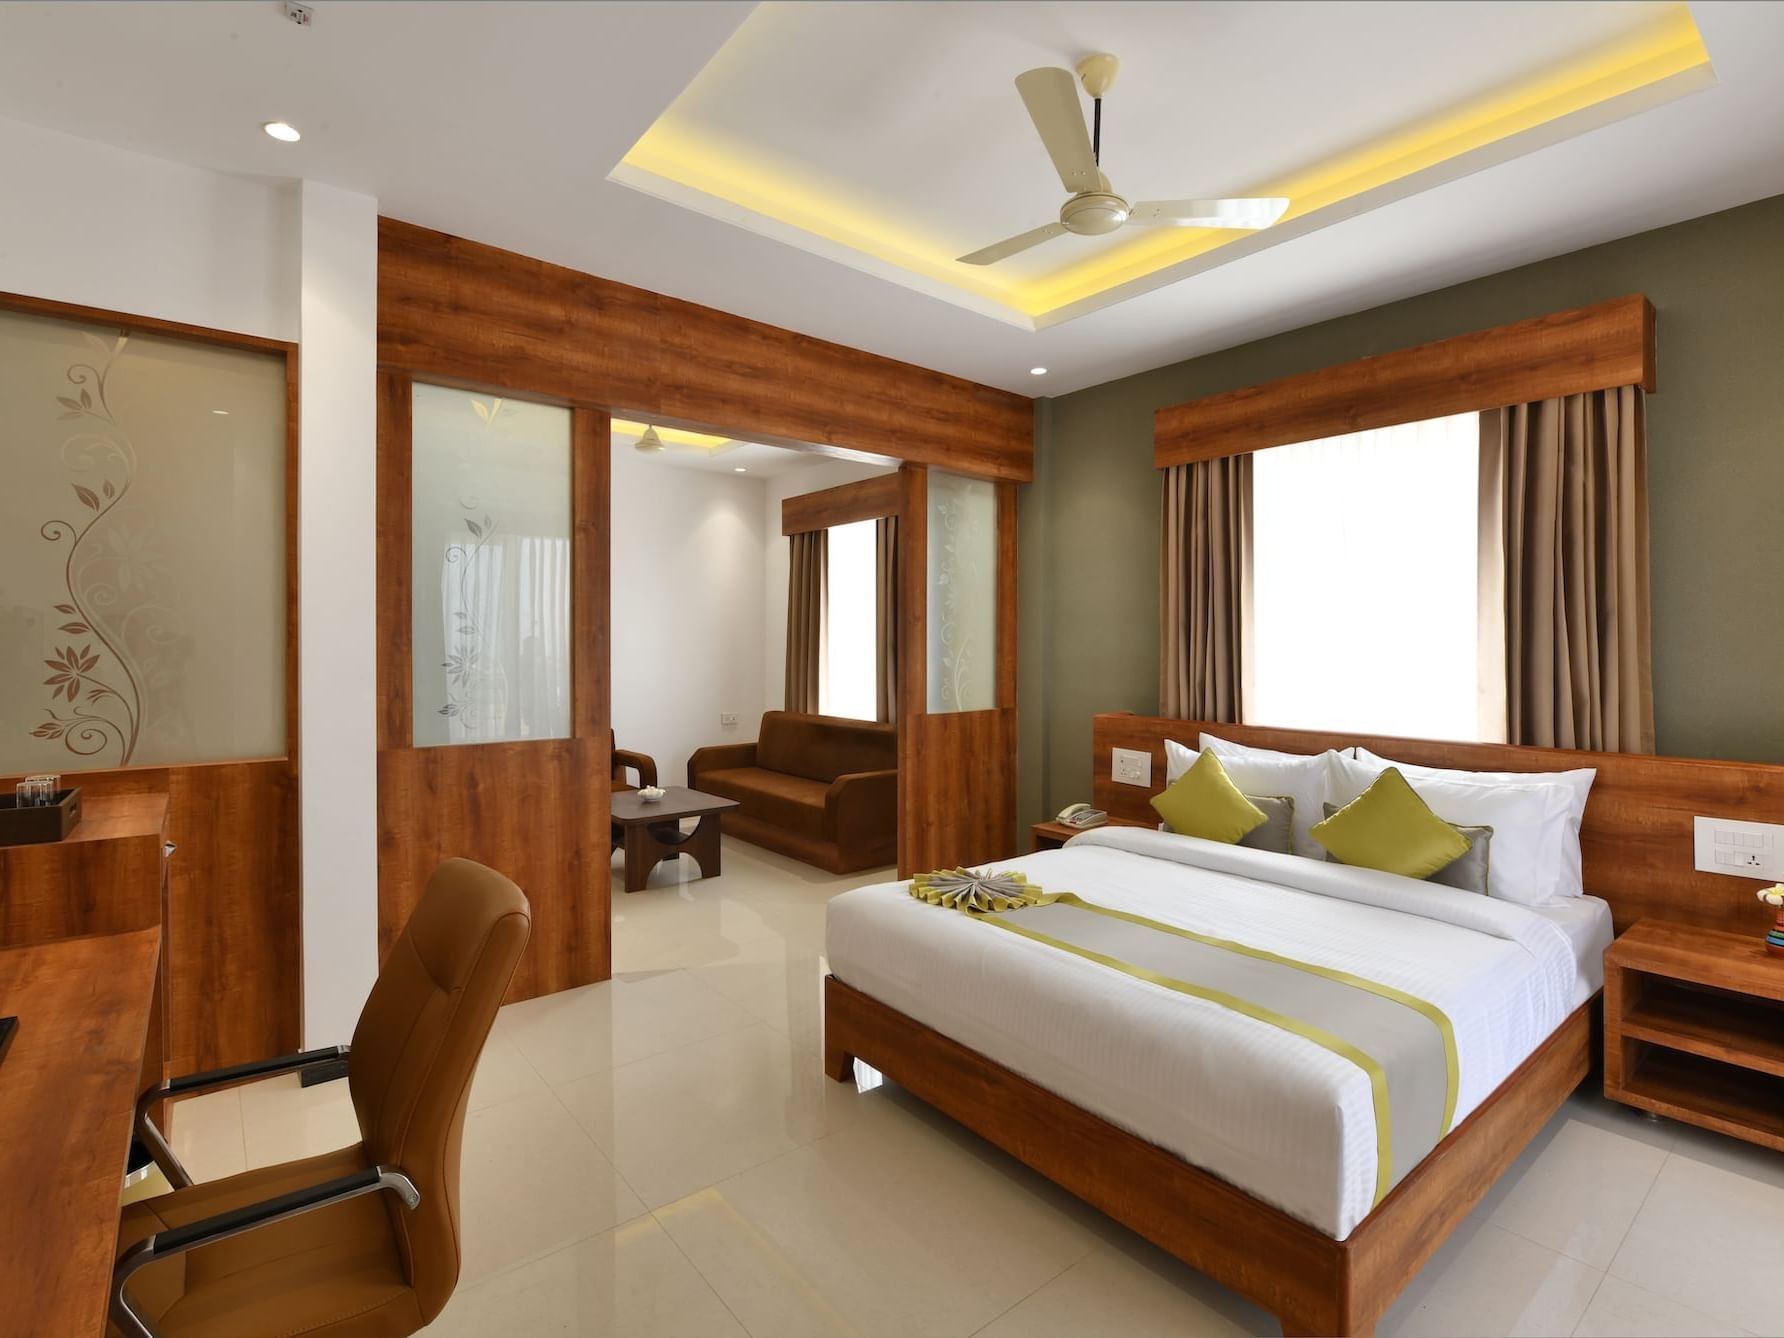 Interior of Bedroom in Executive Suite at Eastin Hotels